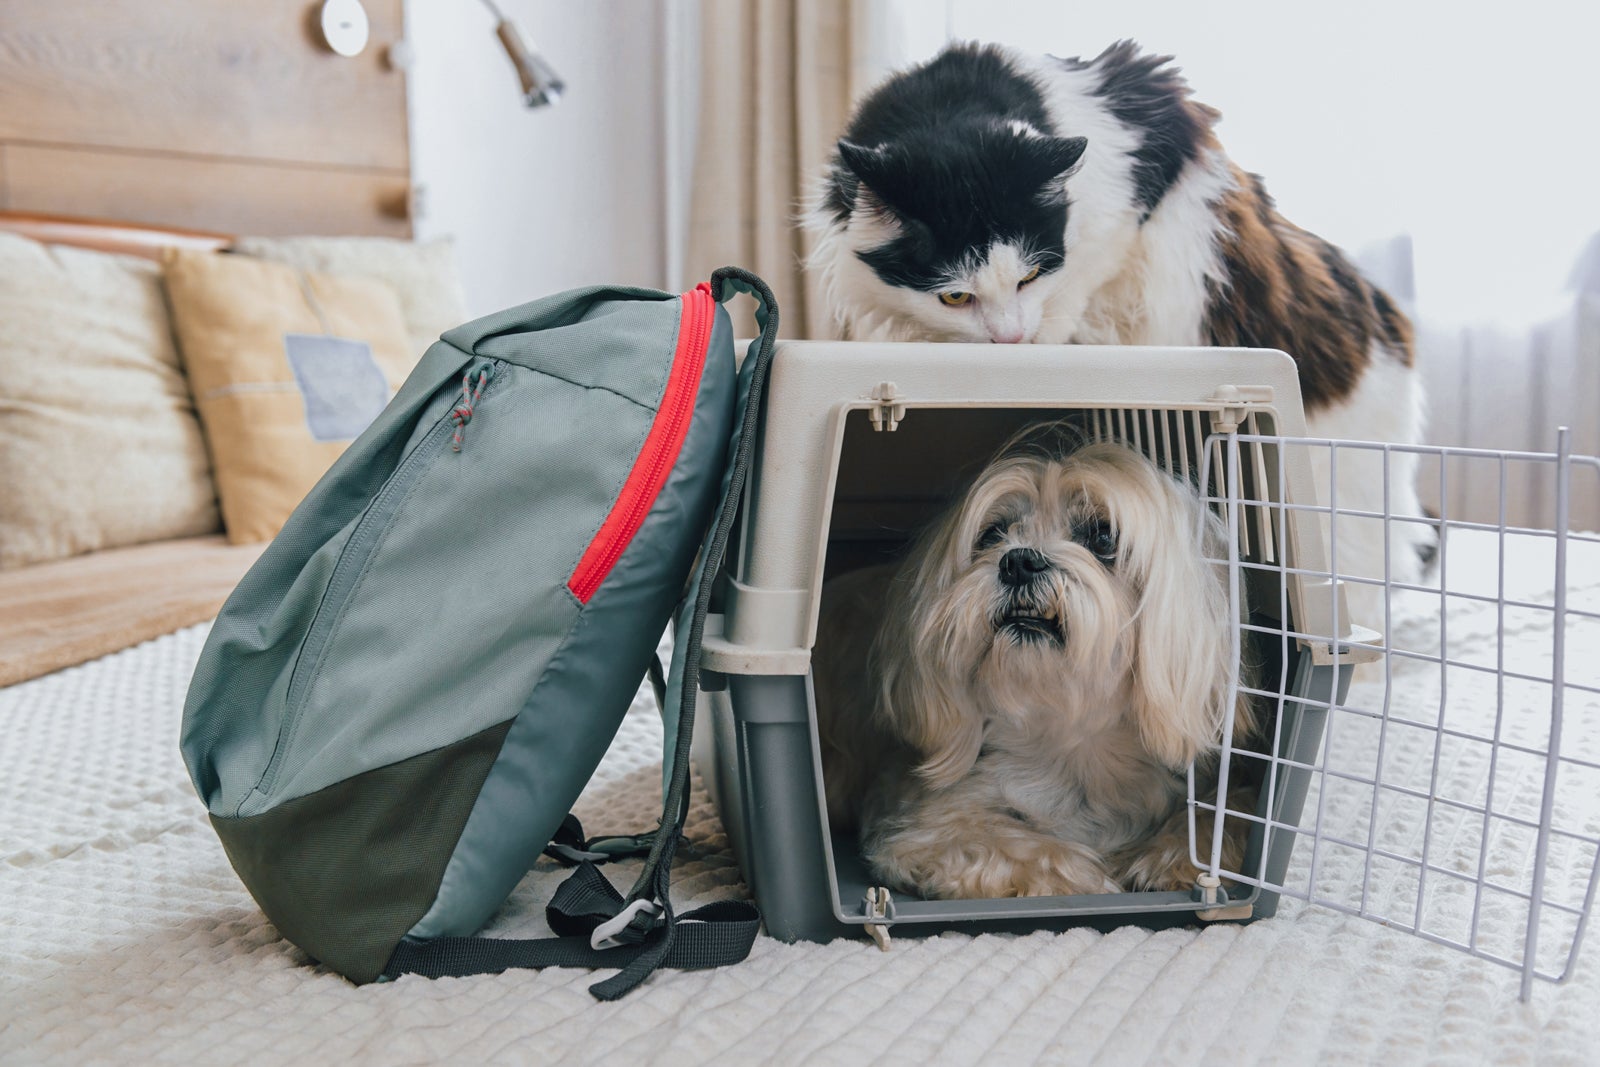 Dog Maltese carrier with luggage